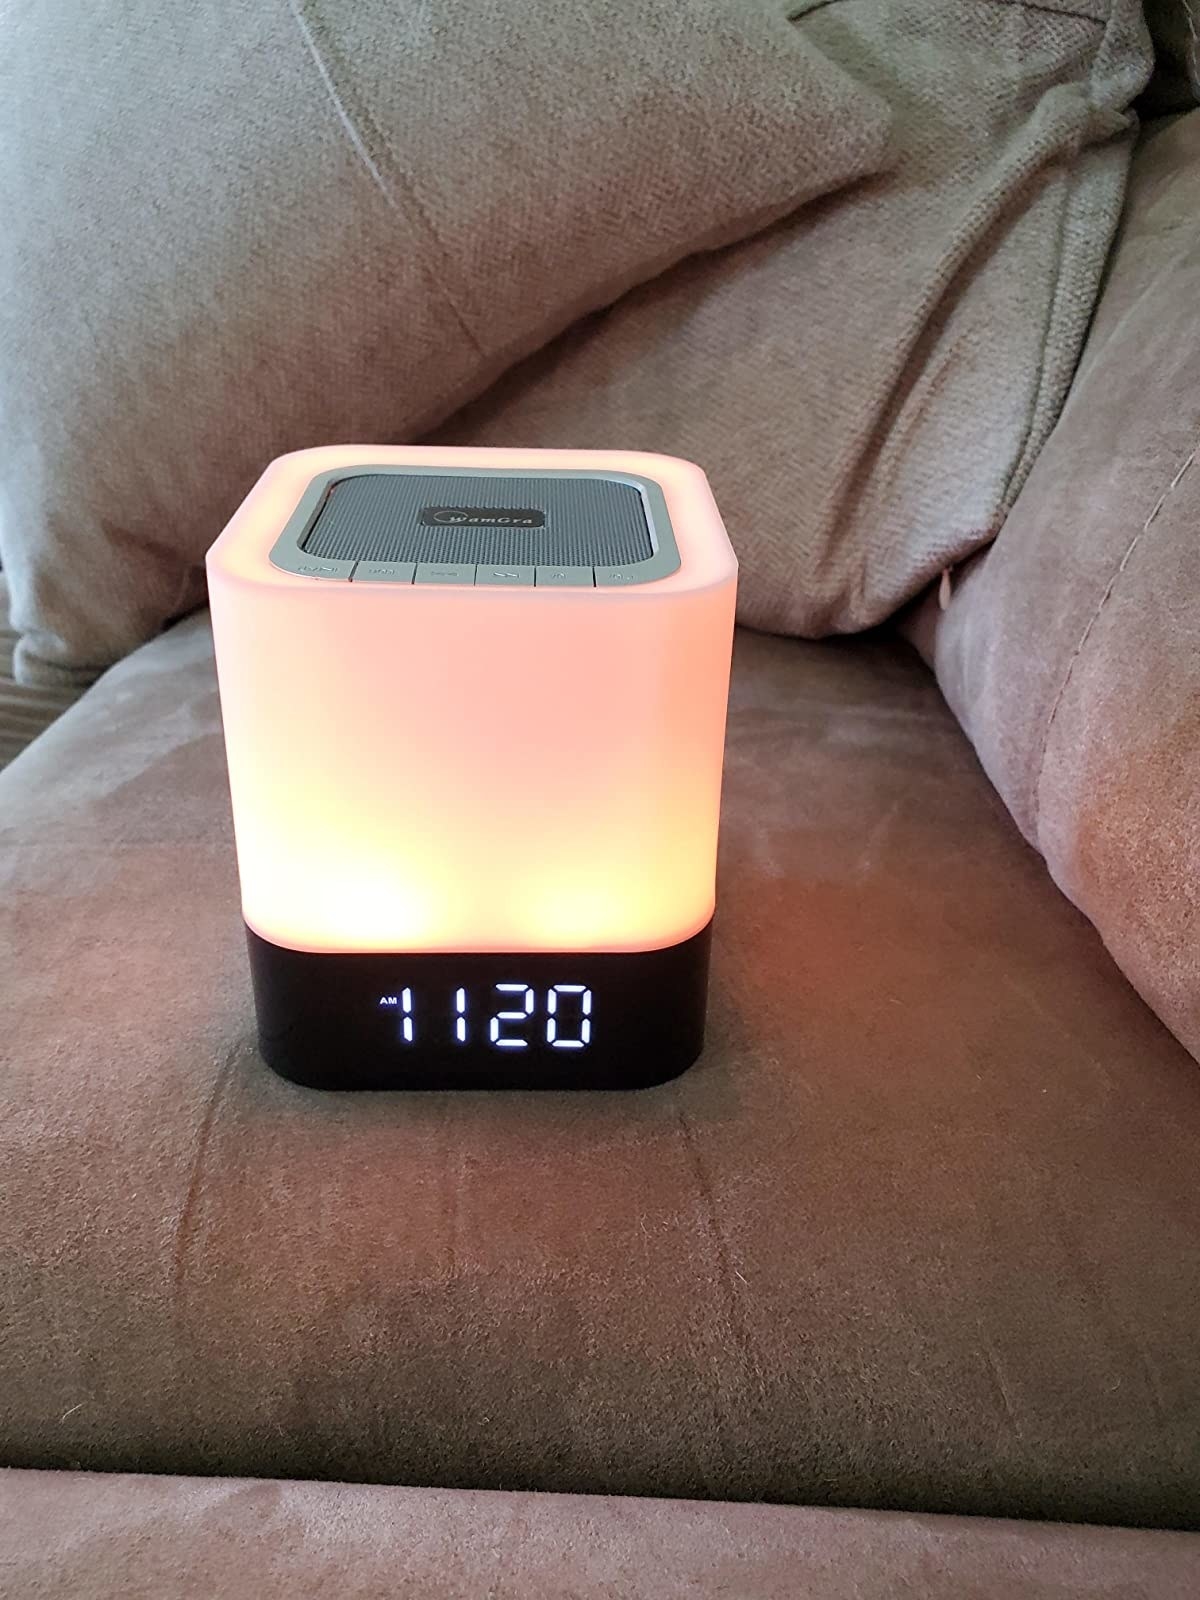 A reviewer&#x27;s speaker showing the time and glowing a warm white